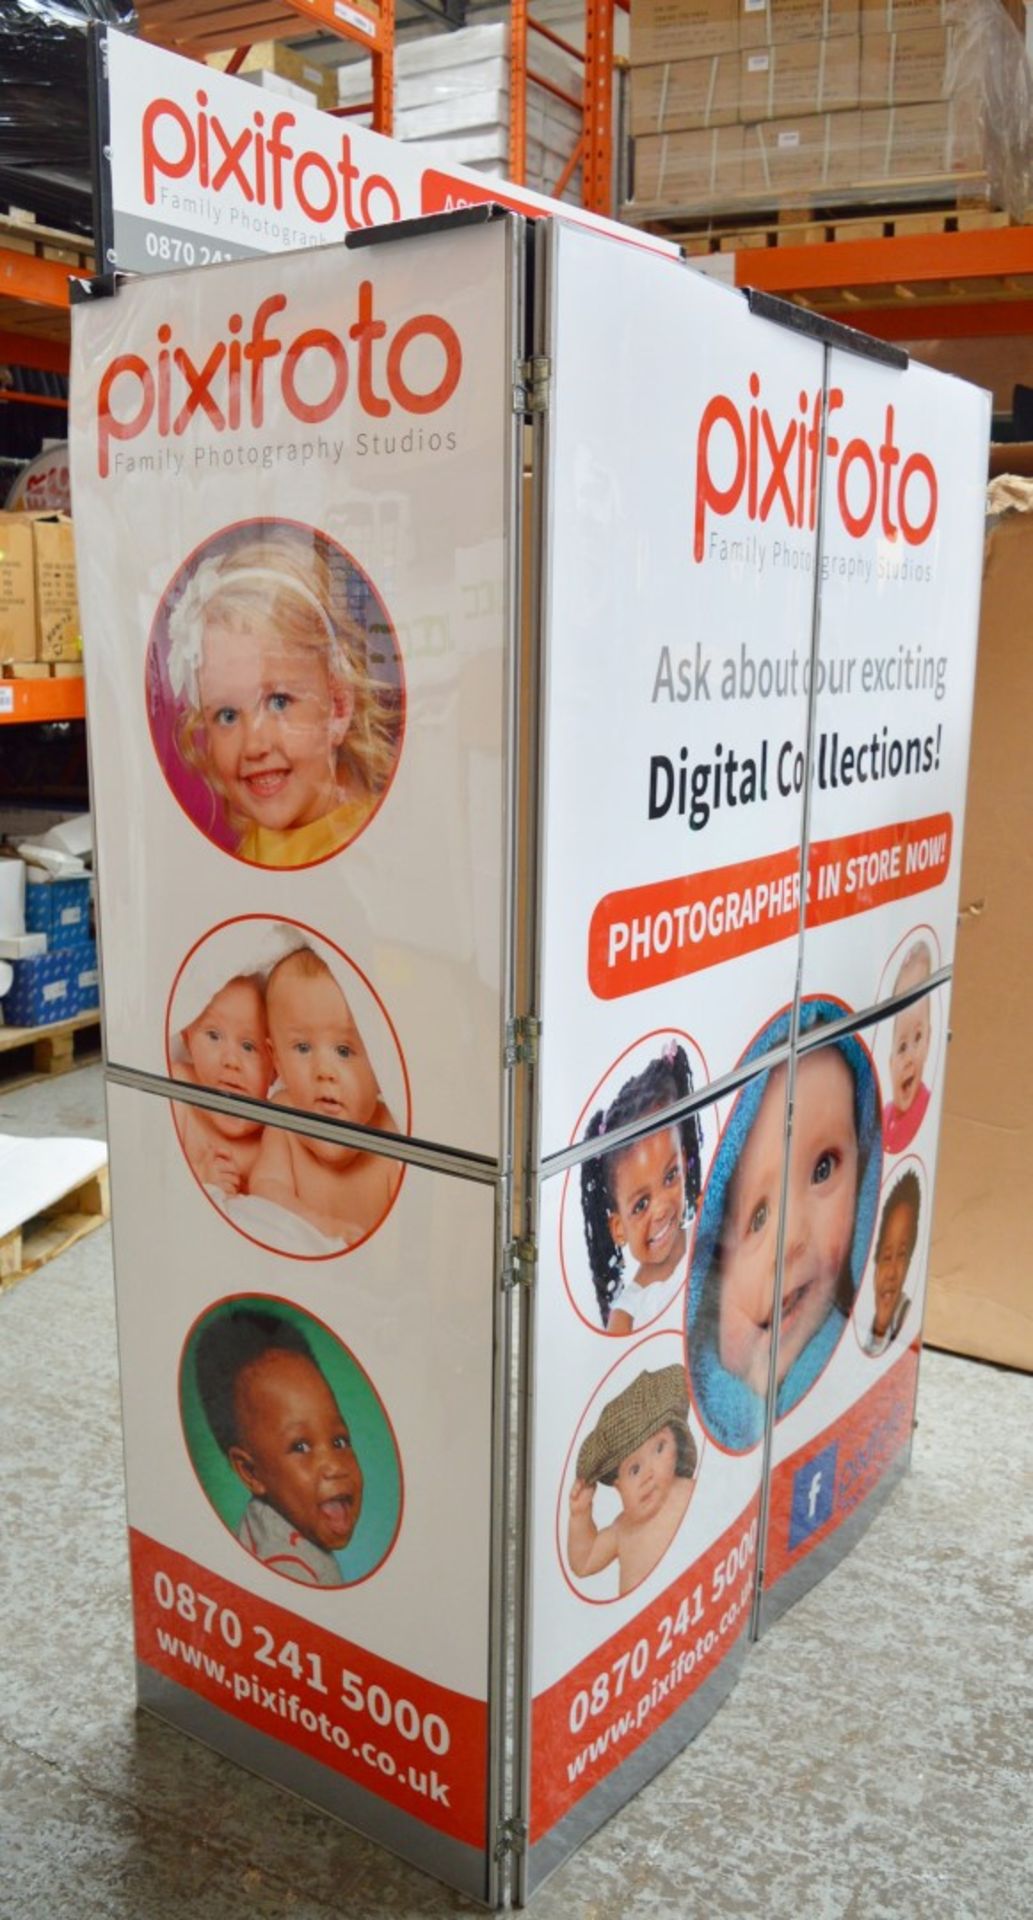 1 x Pixifoto Mobile Flash Photography Booth - Ideal For Use in Shopping Centers, Weddings, - Image 4 of 16